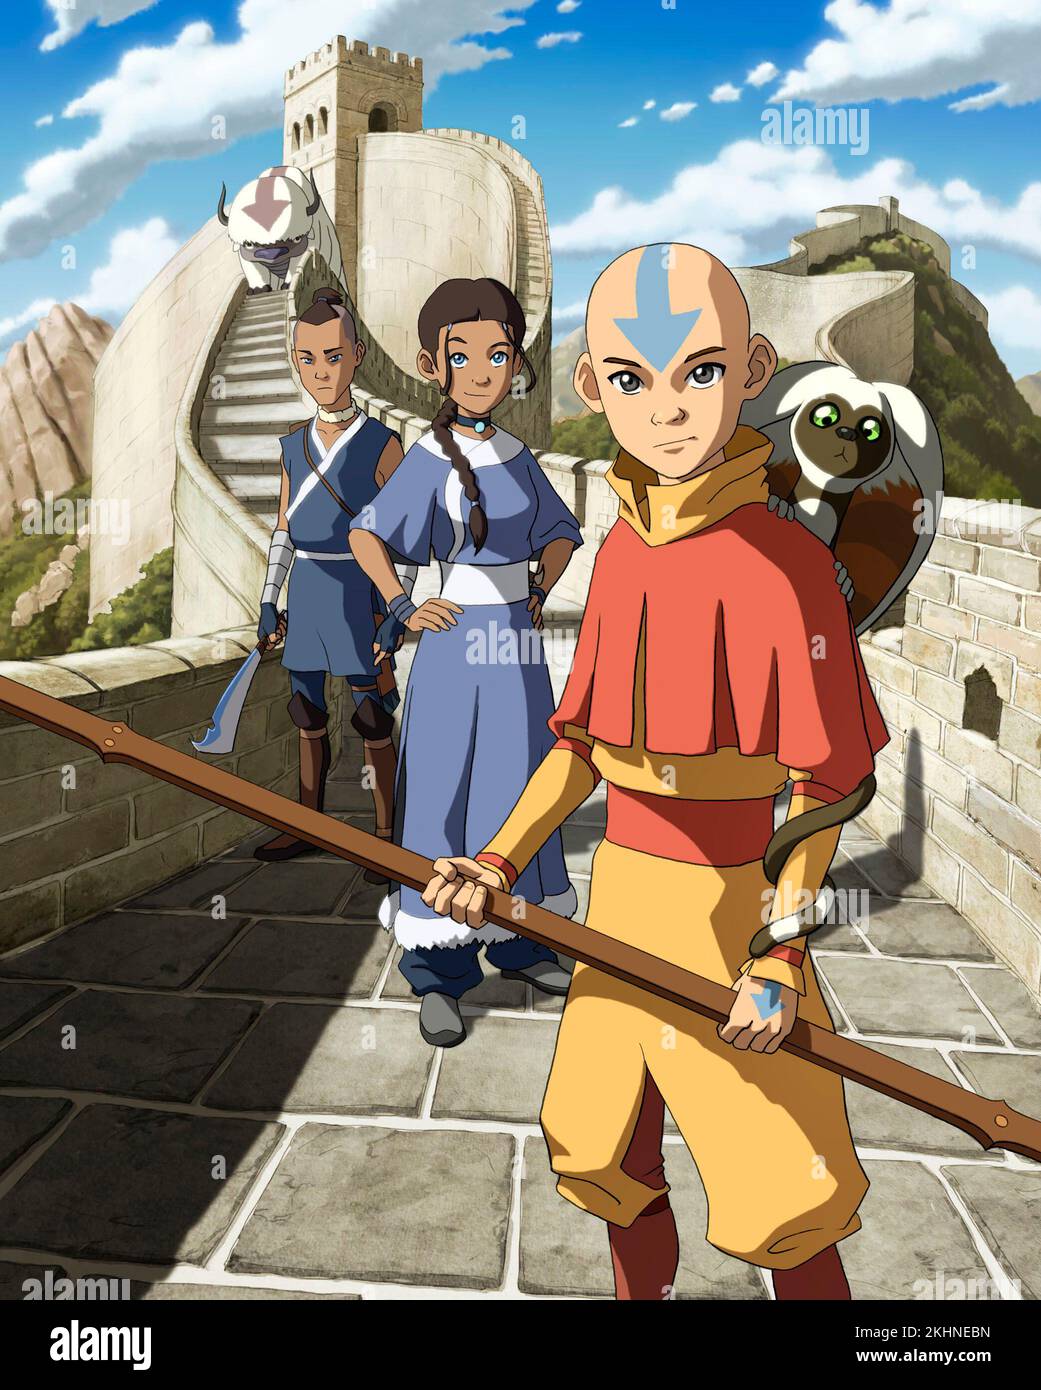 AVATAR: THE LAST AIRBENDER (2005), directed by GIANCARLO VOLPE. Credit: Nickelodeon Animation Studios / Album Stock Photo